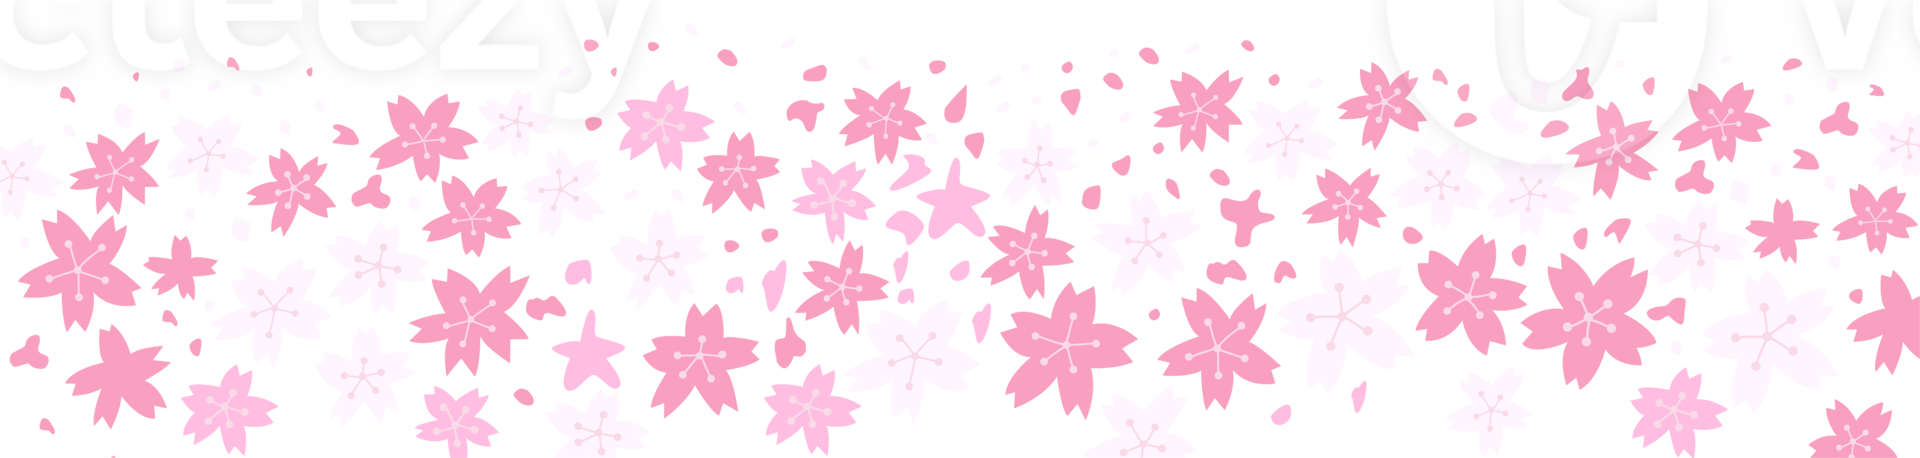 cute pink blossom png